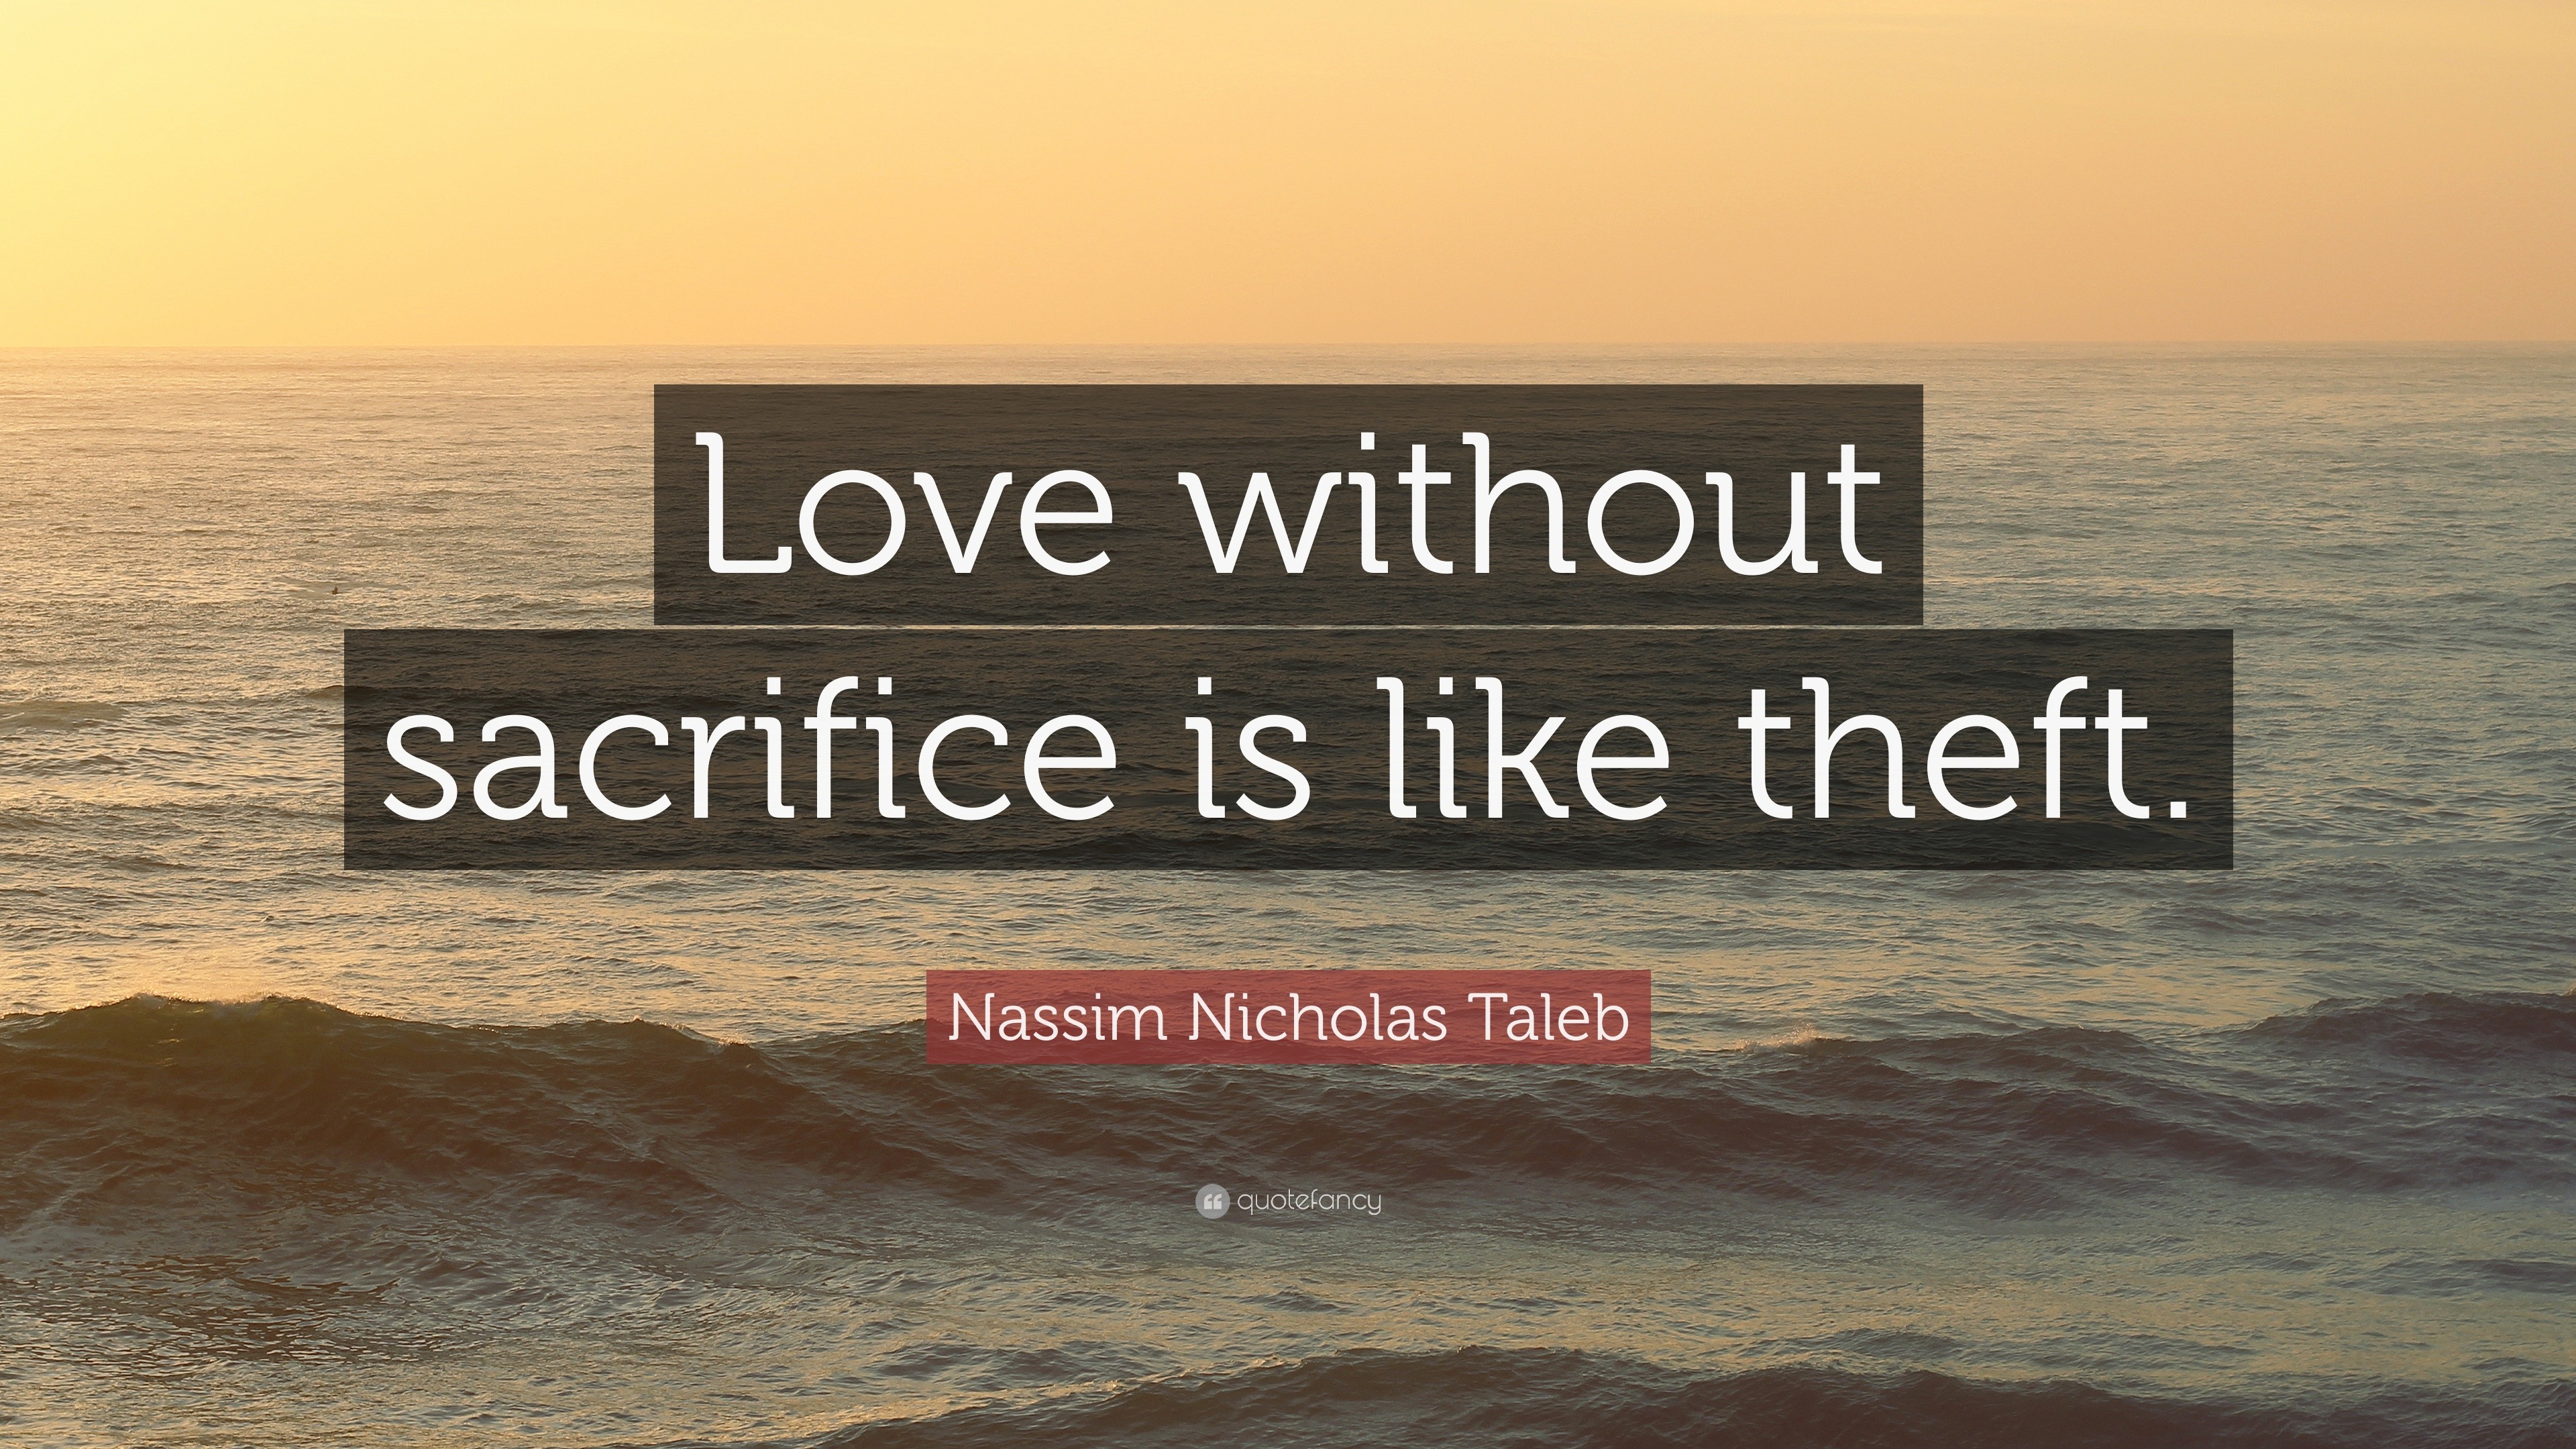 Nassim Nicholas Taleb Quote: "Love without sacrifice is like theft."